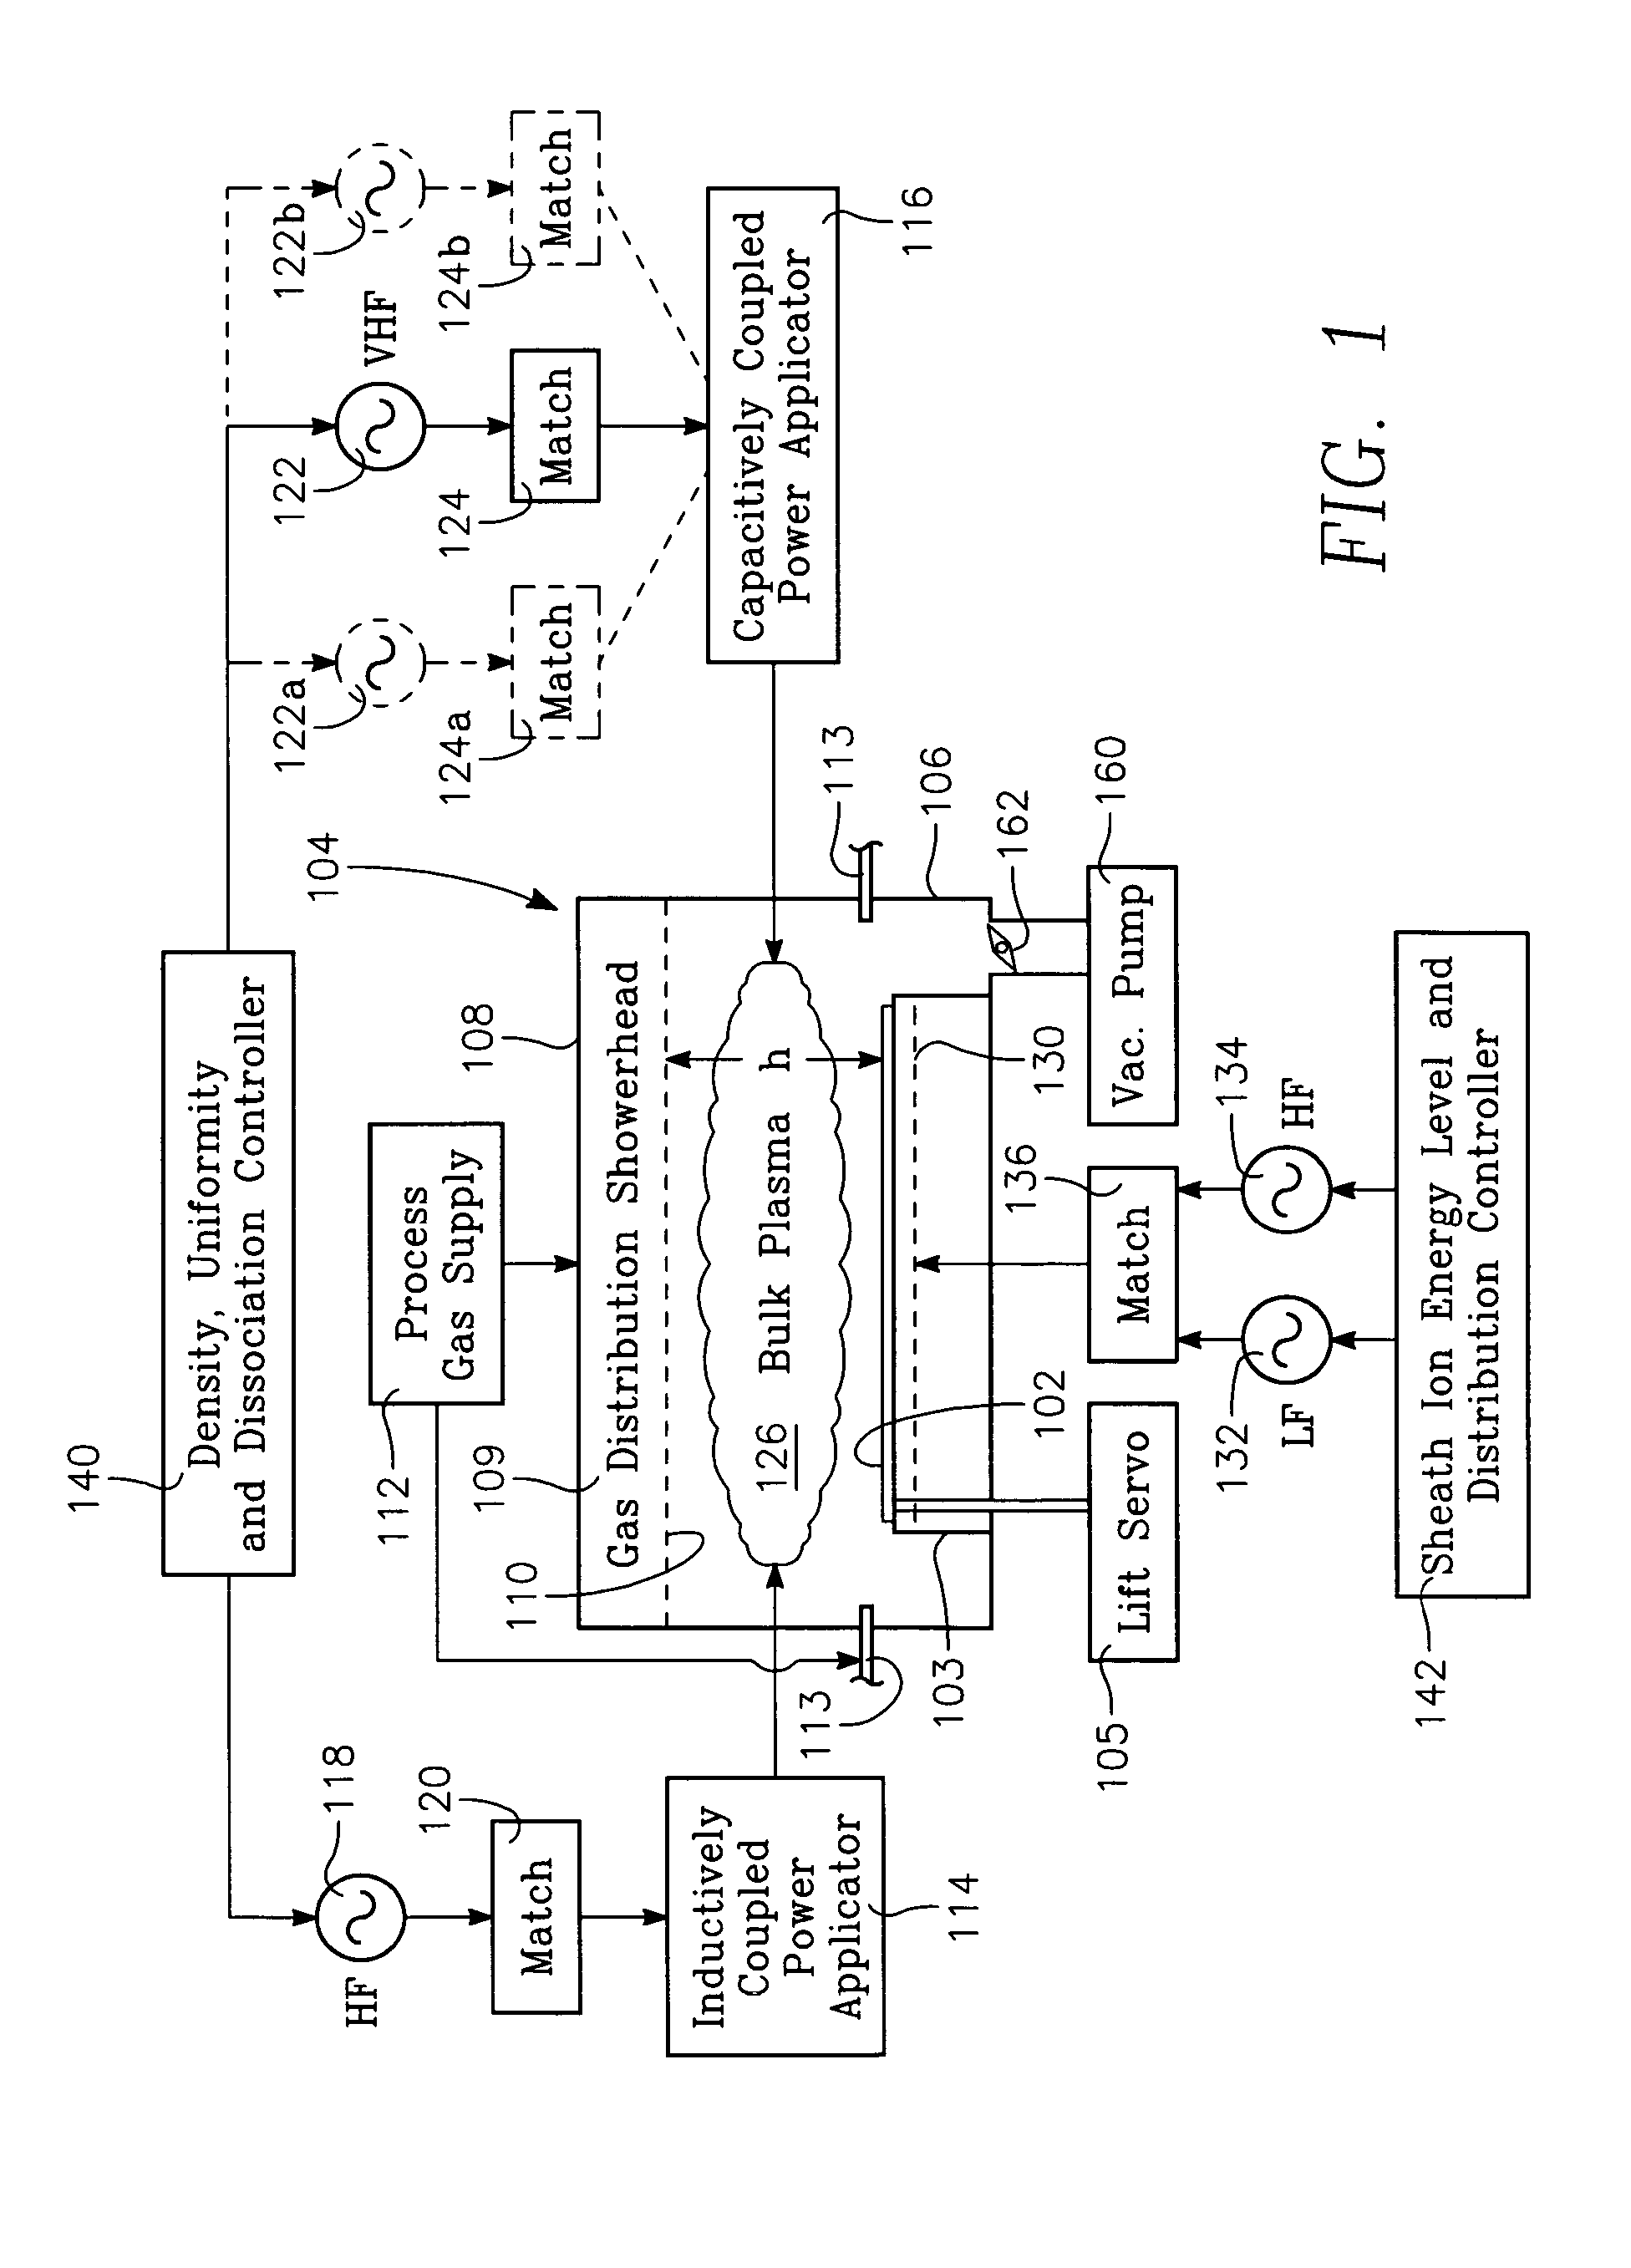 Dual plasma source process using a variable frequency capacitively coupled source to control plasma ion density